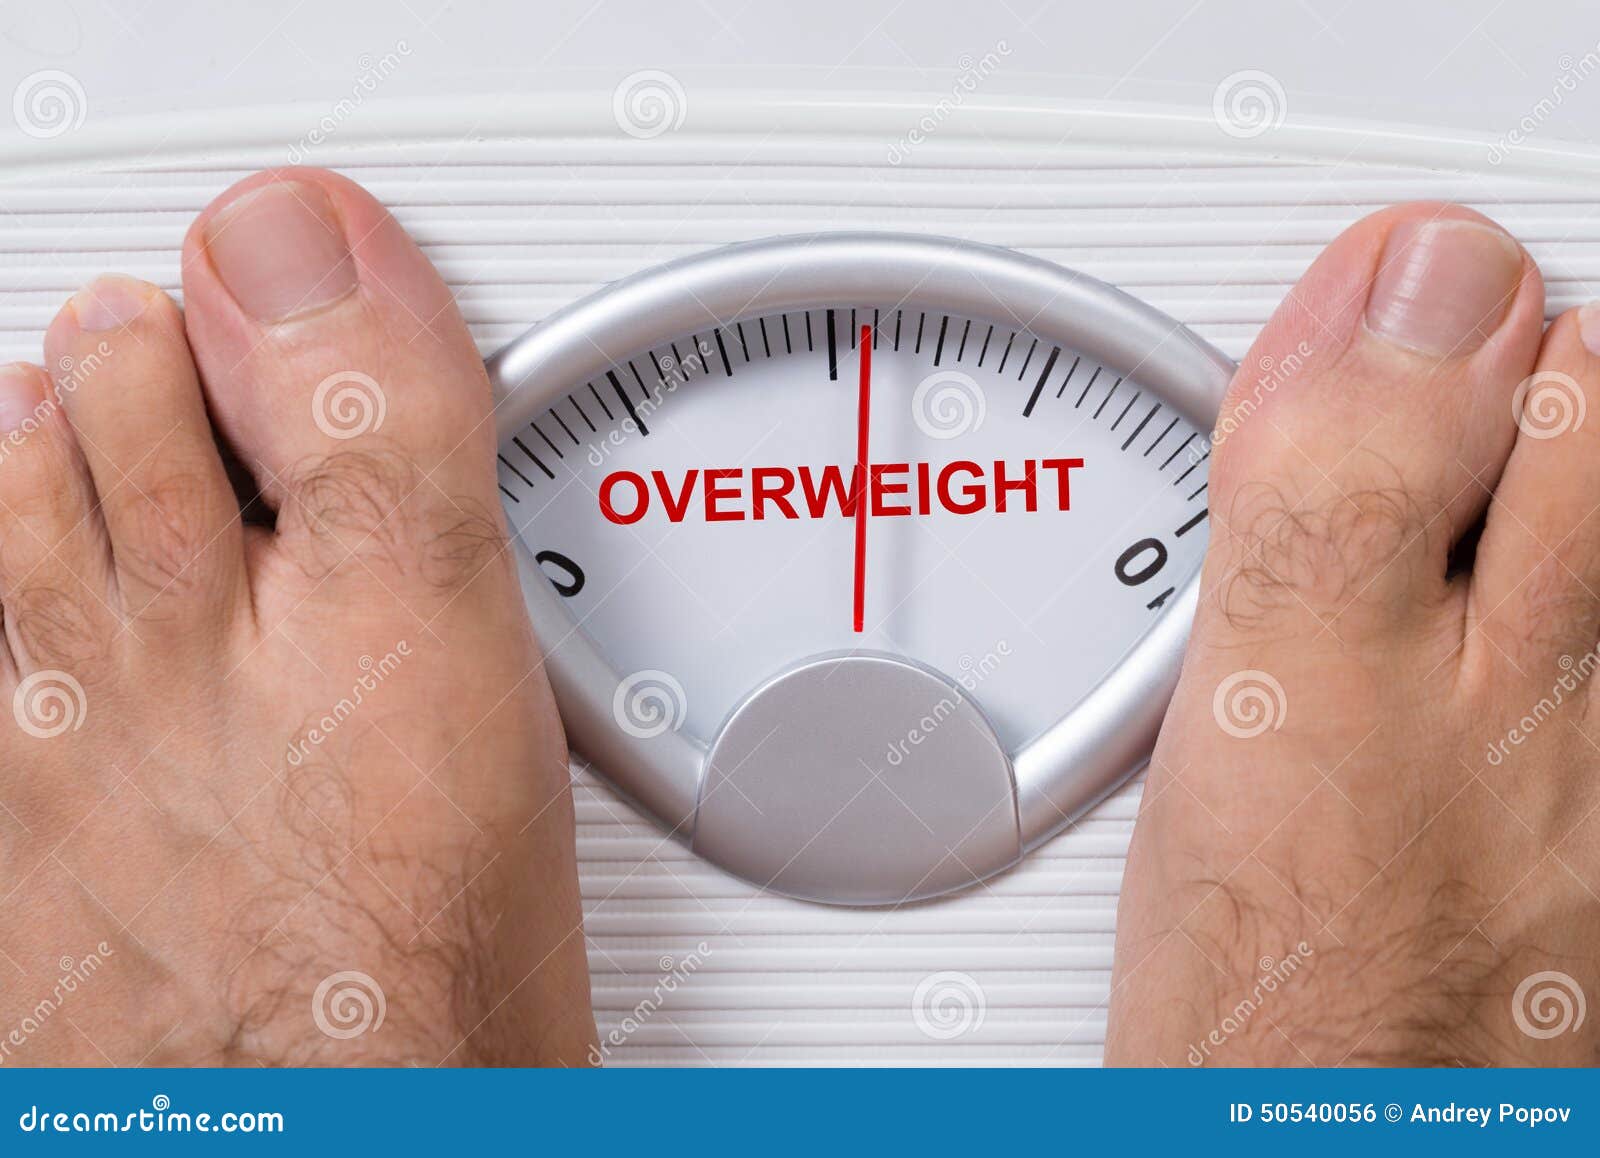 feet on weight scale indicating overweight